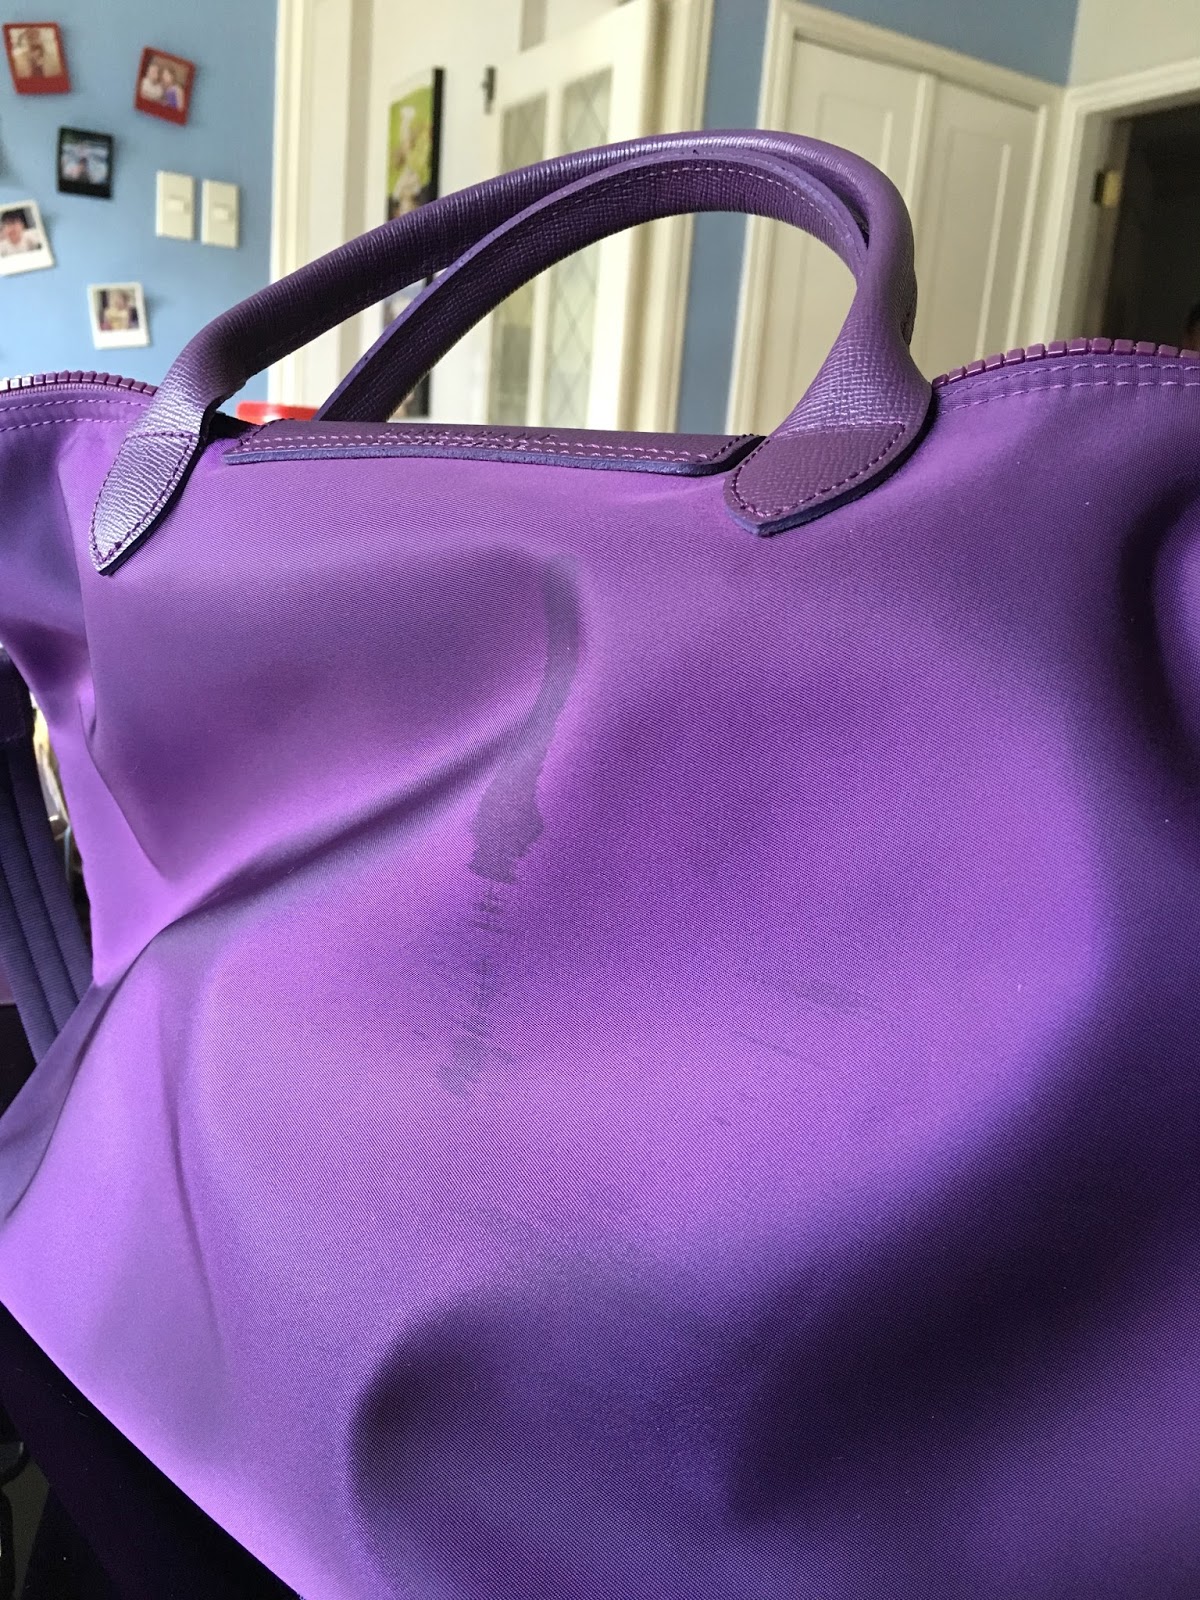 how to remove stain from longchamp bag